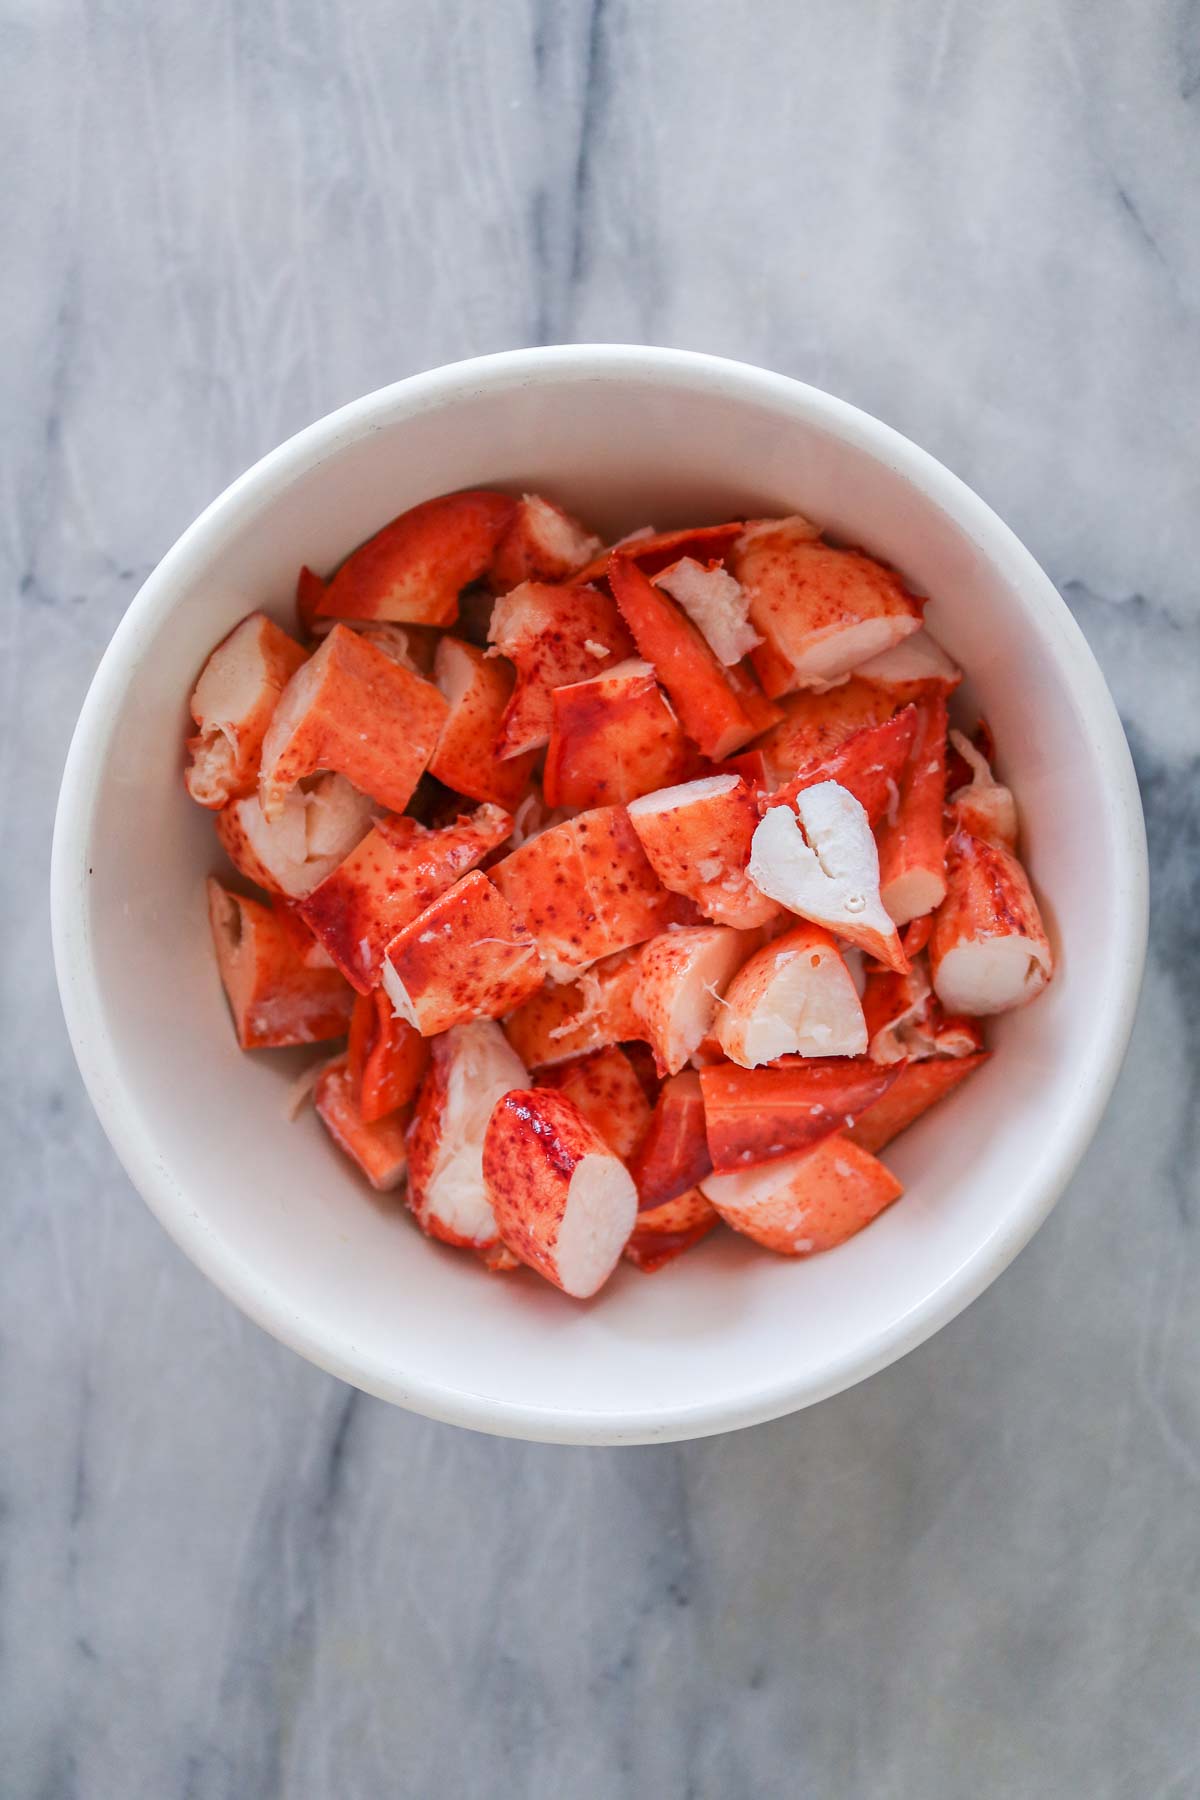 Chunks of cooked lobster meat in a bowl.